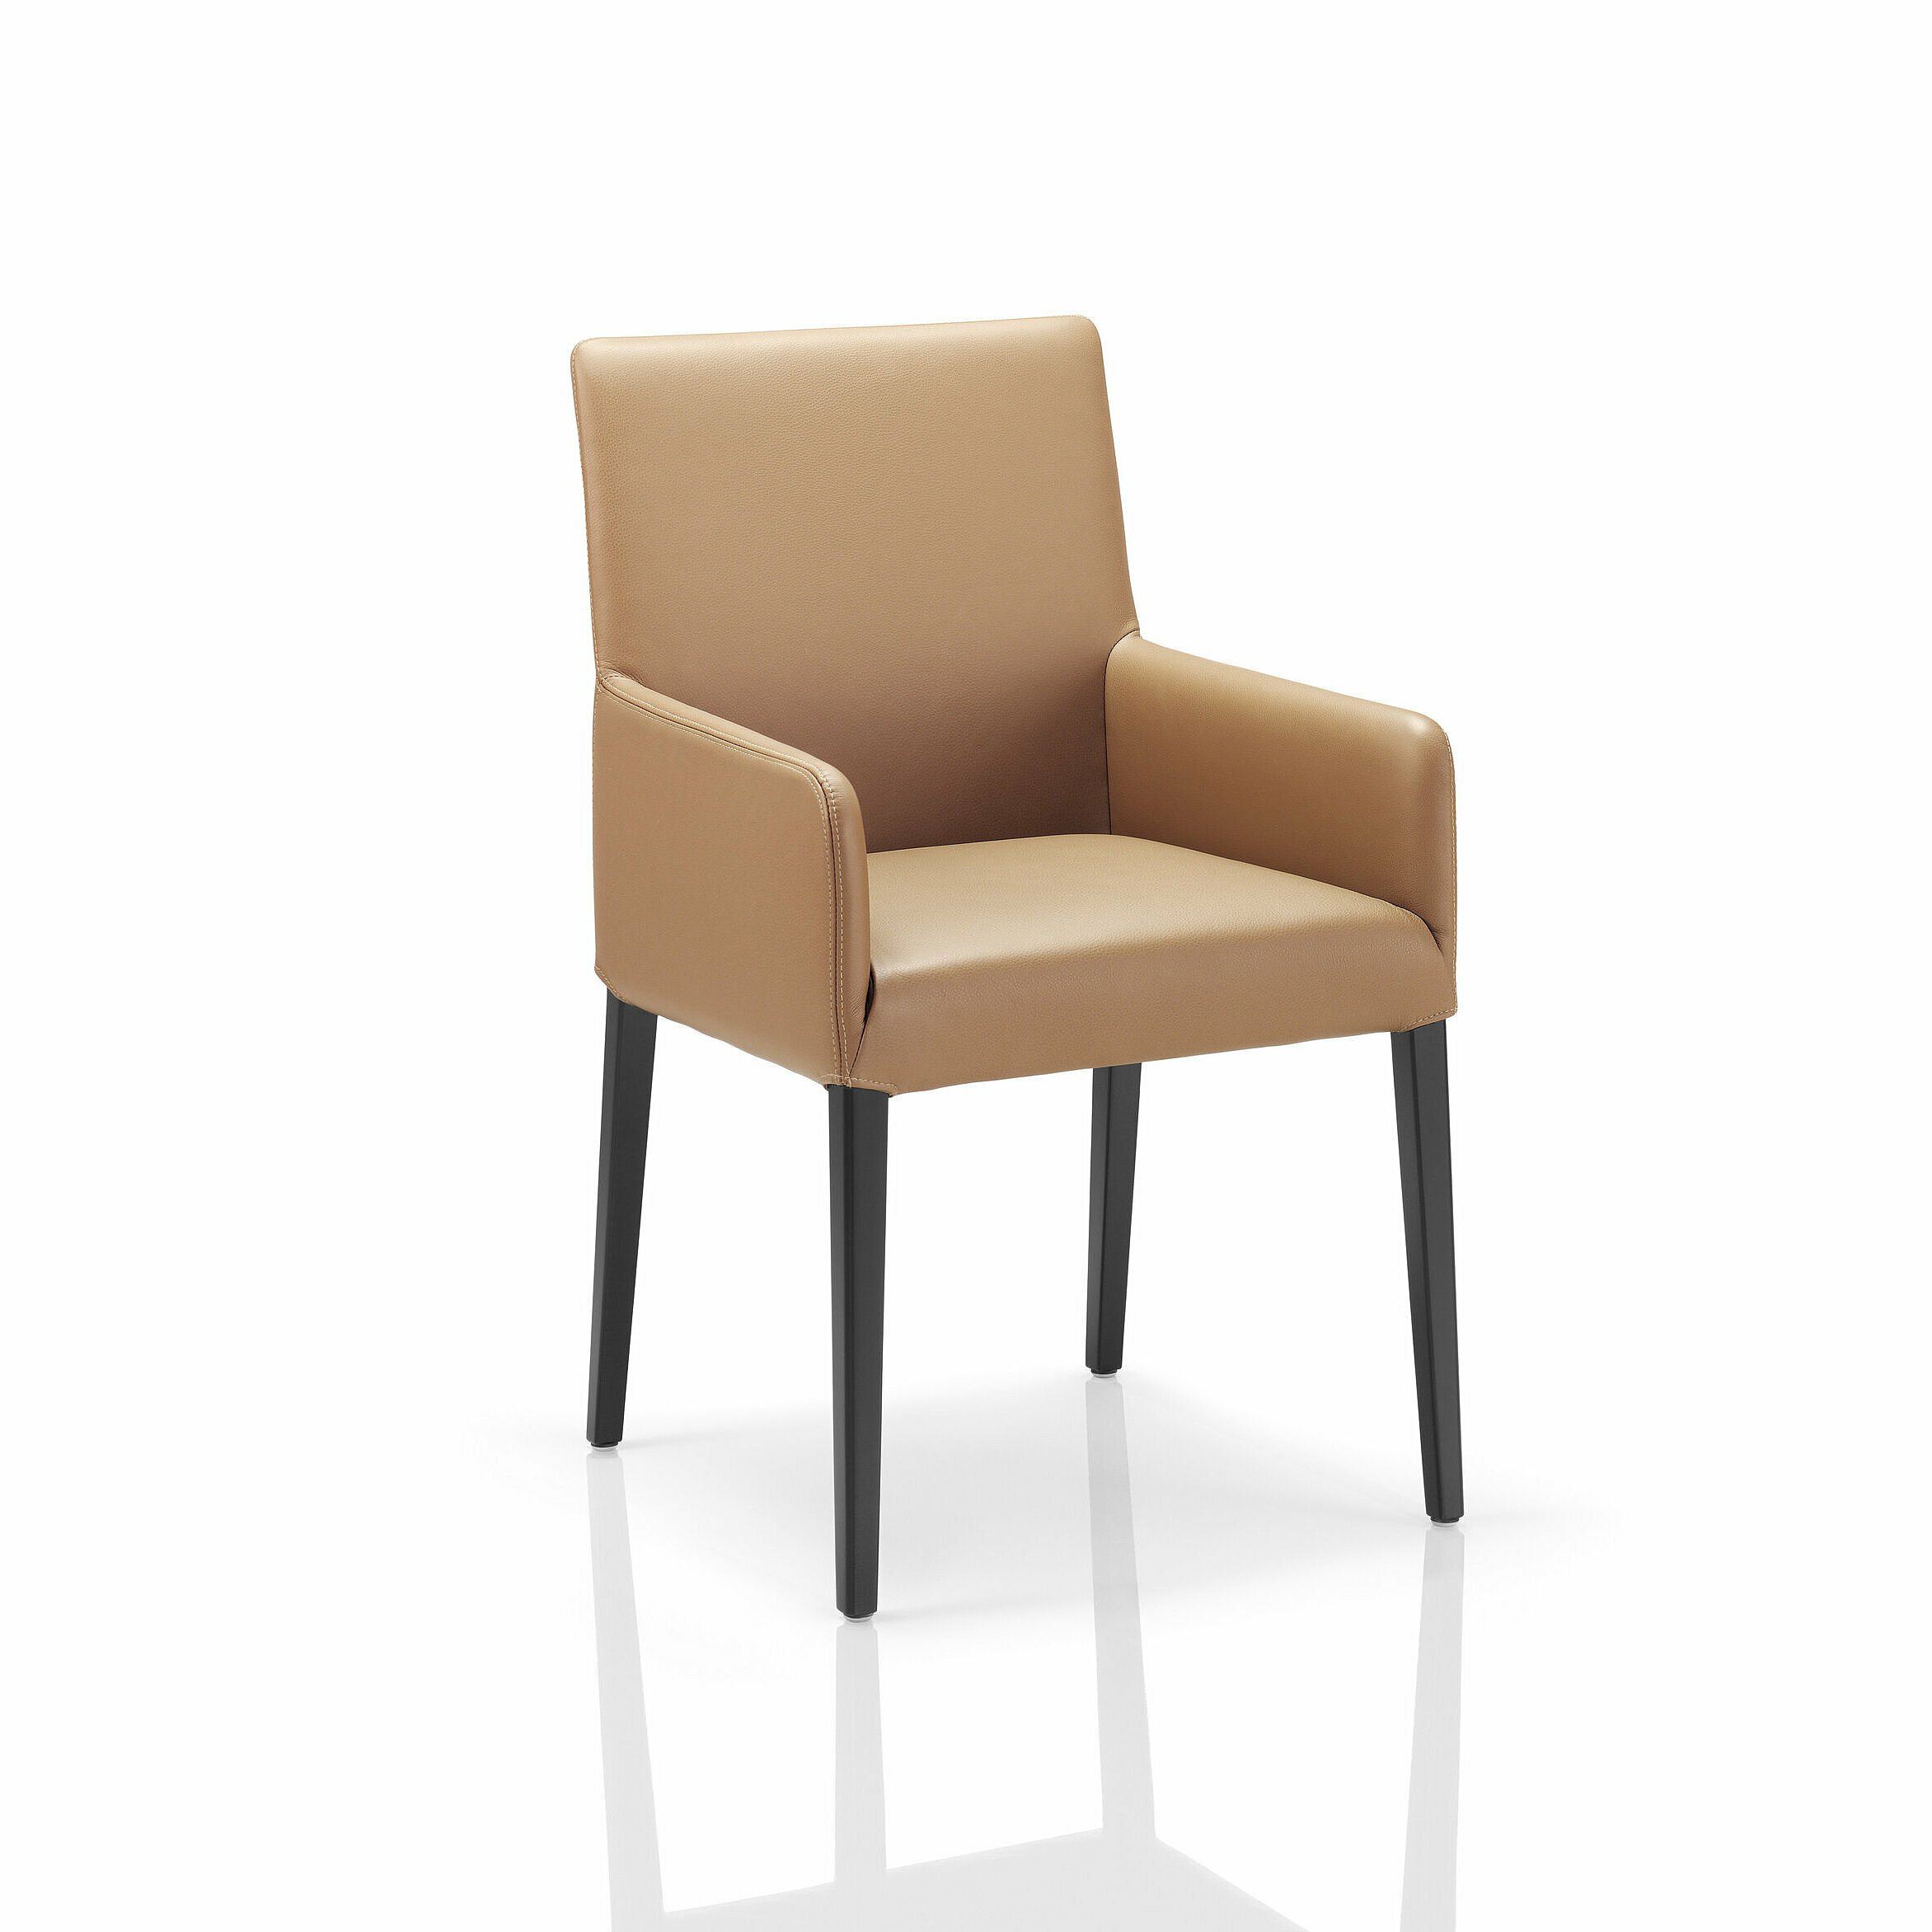 Nils chair with armrests in genuin ocher